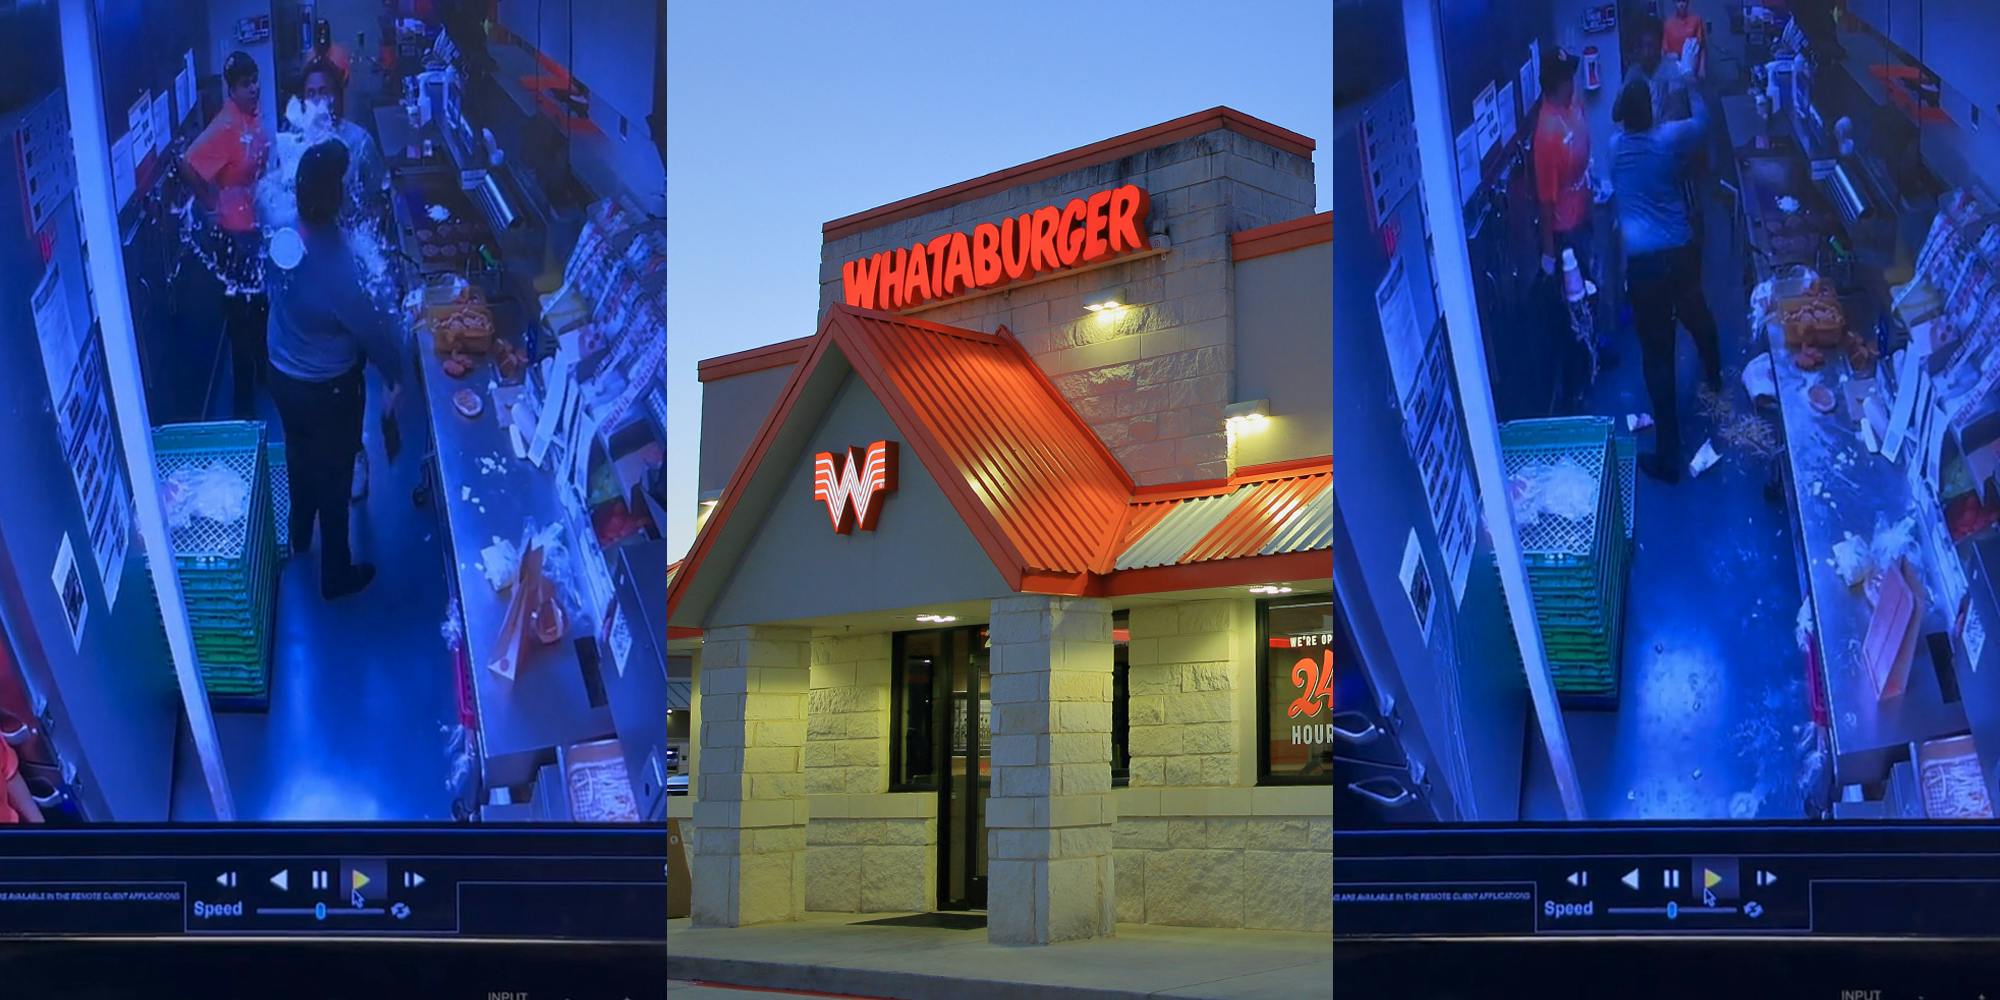 Whataburger security cam footage of worker being splashed with drink (l) Whataburger building entrance with sign (c) Whataburger security cam footage of worker raising hand up after drink was thrown (r)